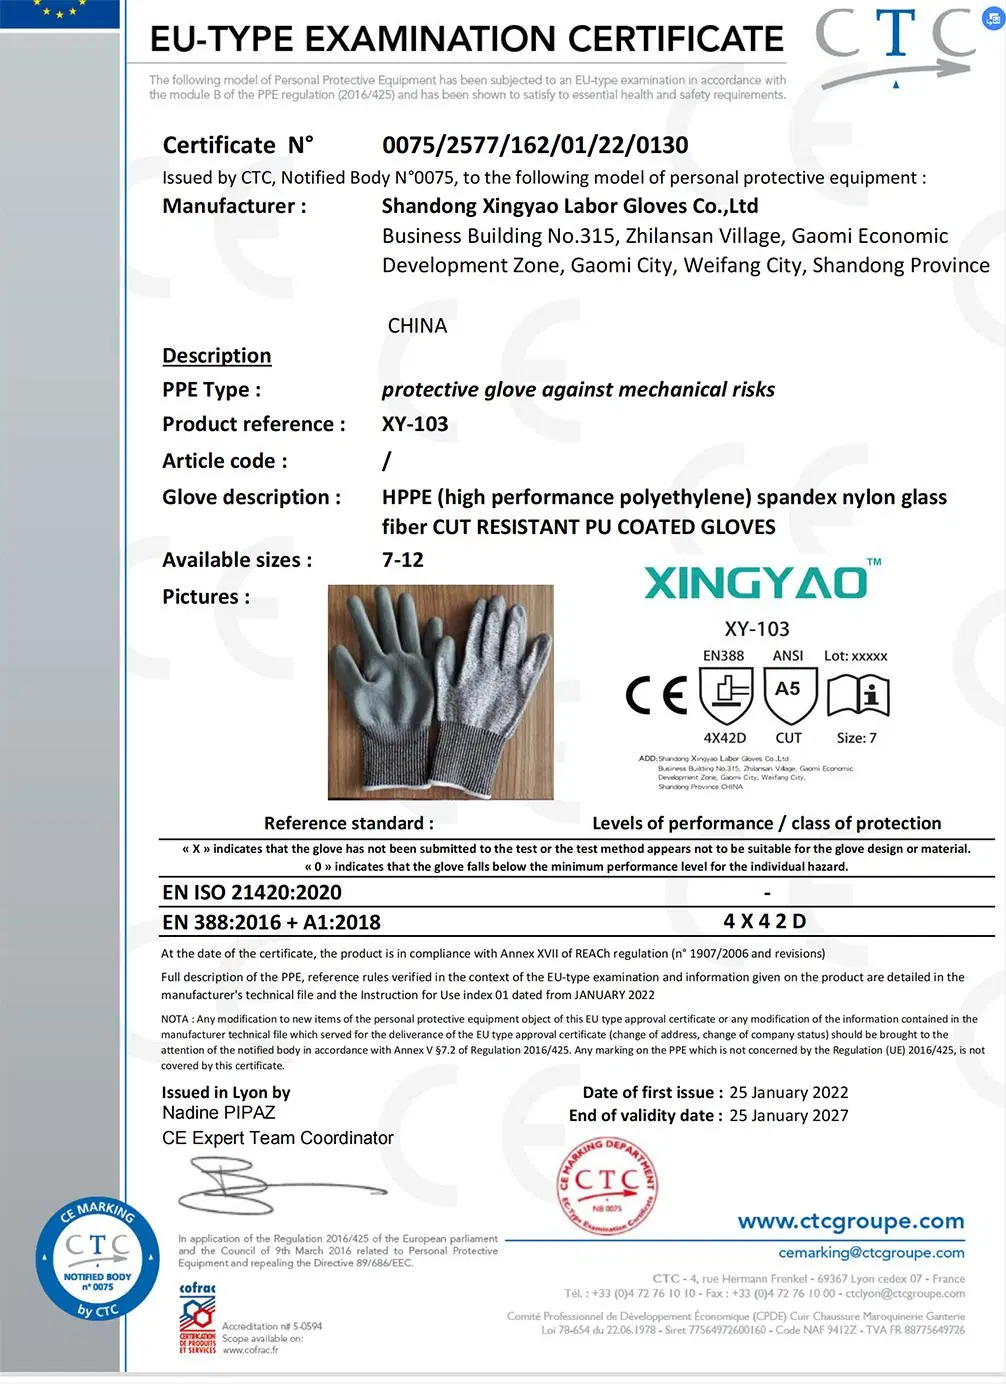 En388 ANSI5 Nylon &amp; Hppe &amp; Glass Fiber Liner PU (Polyurethane) Coated Anti Cut Resistant Cutting Proof Work Safety Hand Protection Knitted Gloves